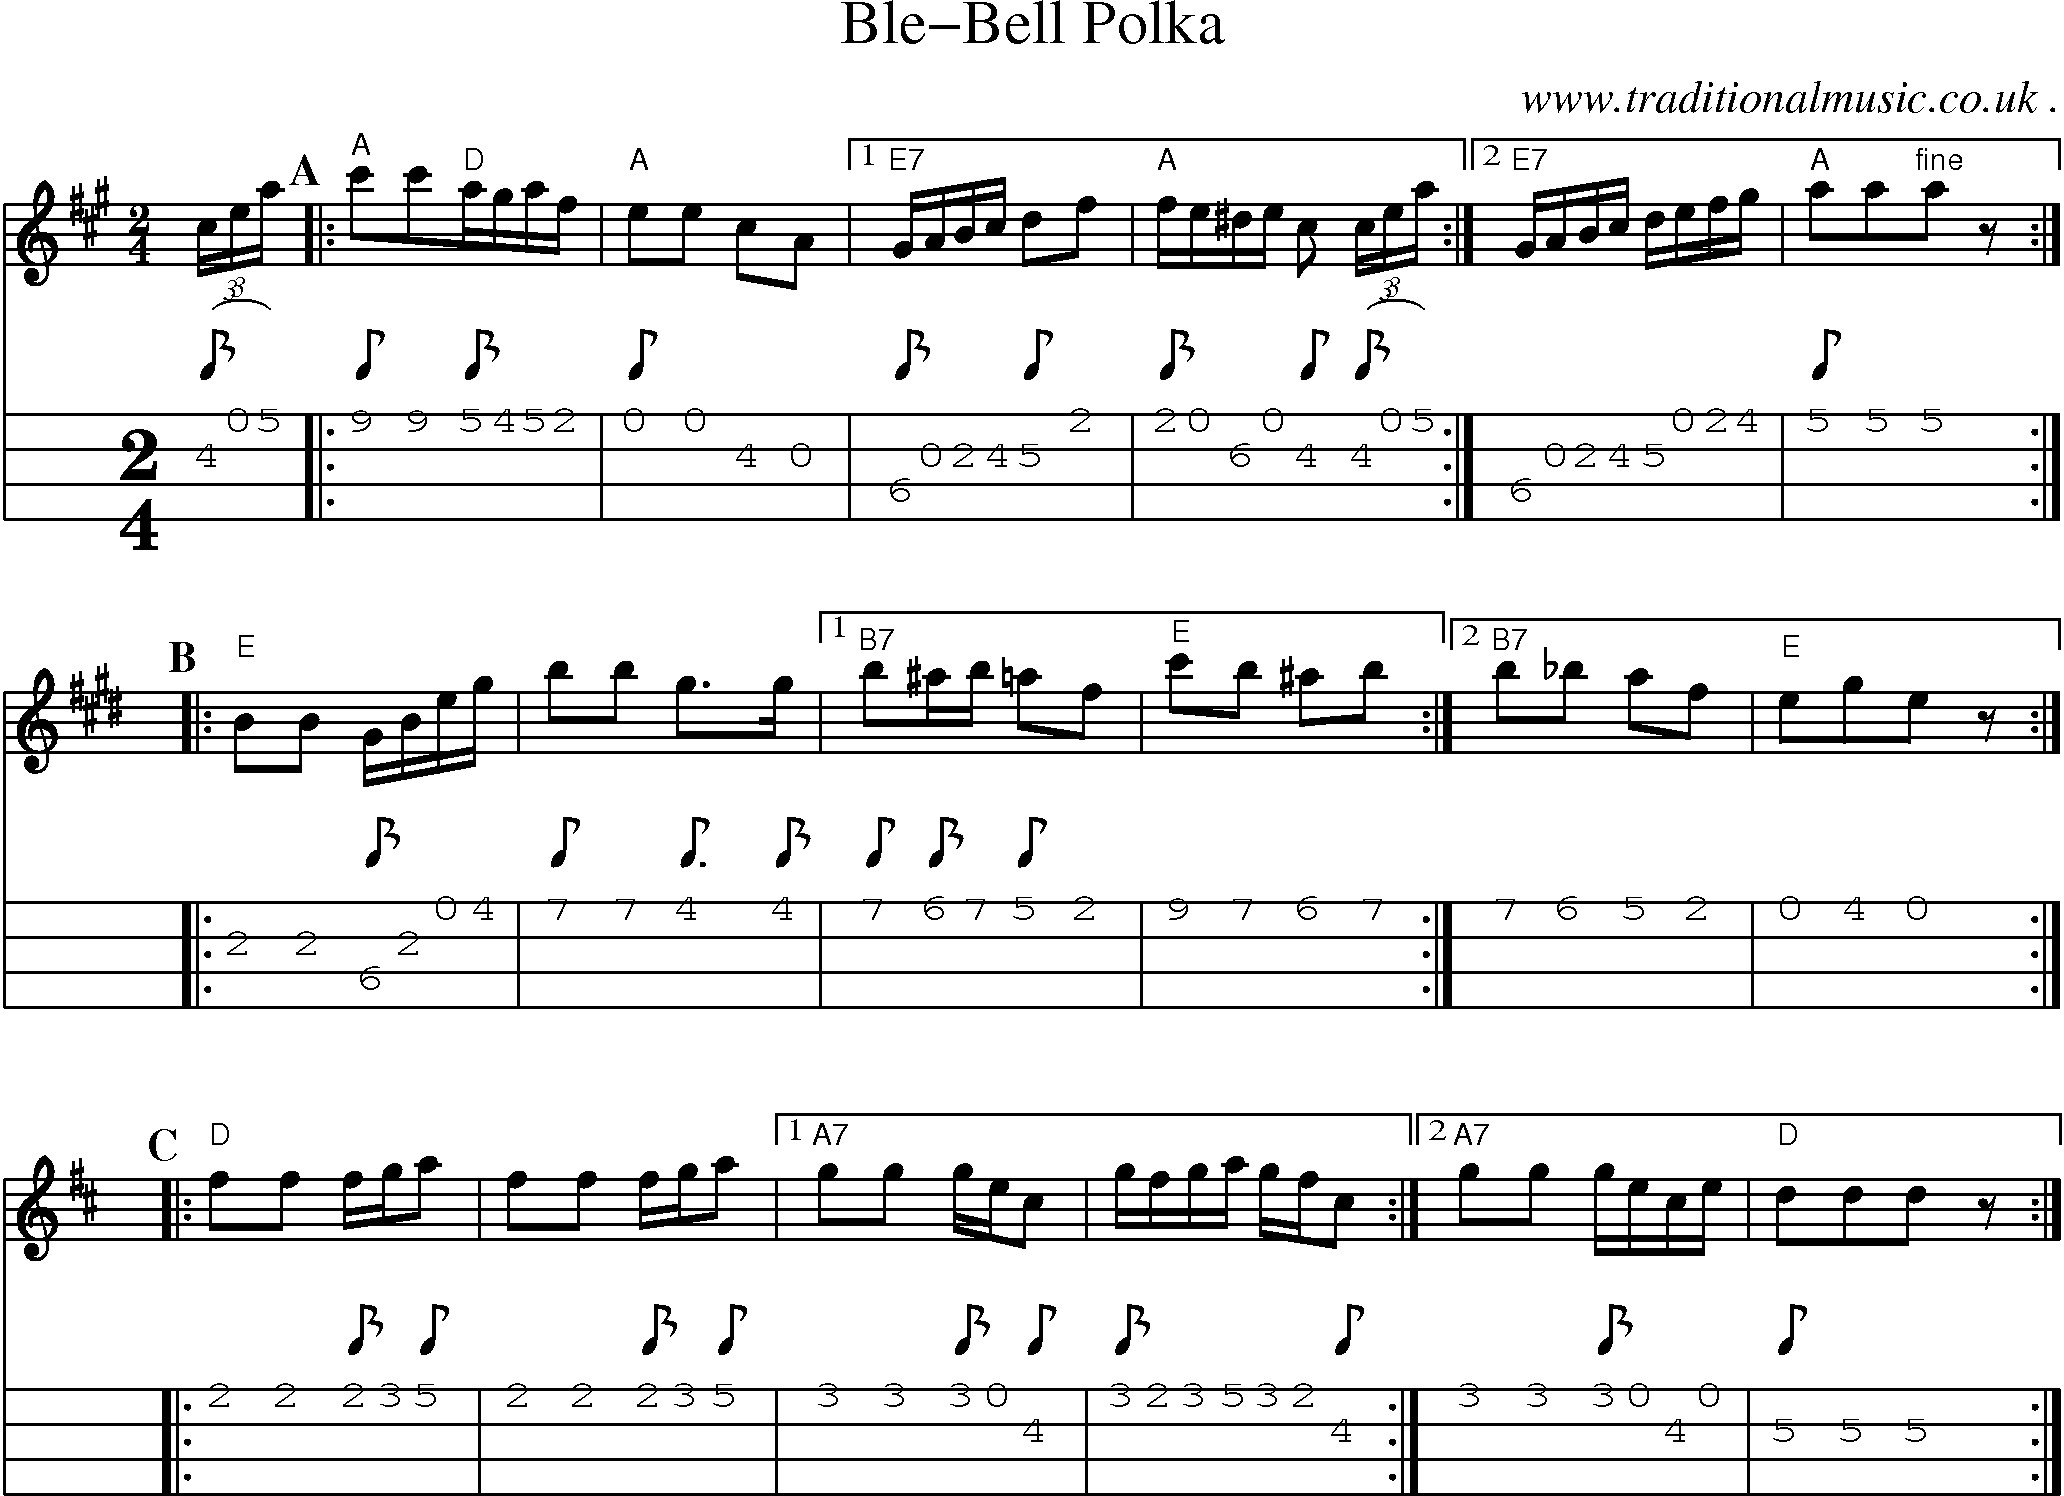 Sheet-Music and Mandolin Tabs for Ble-bell Polka